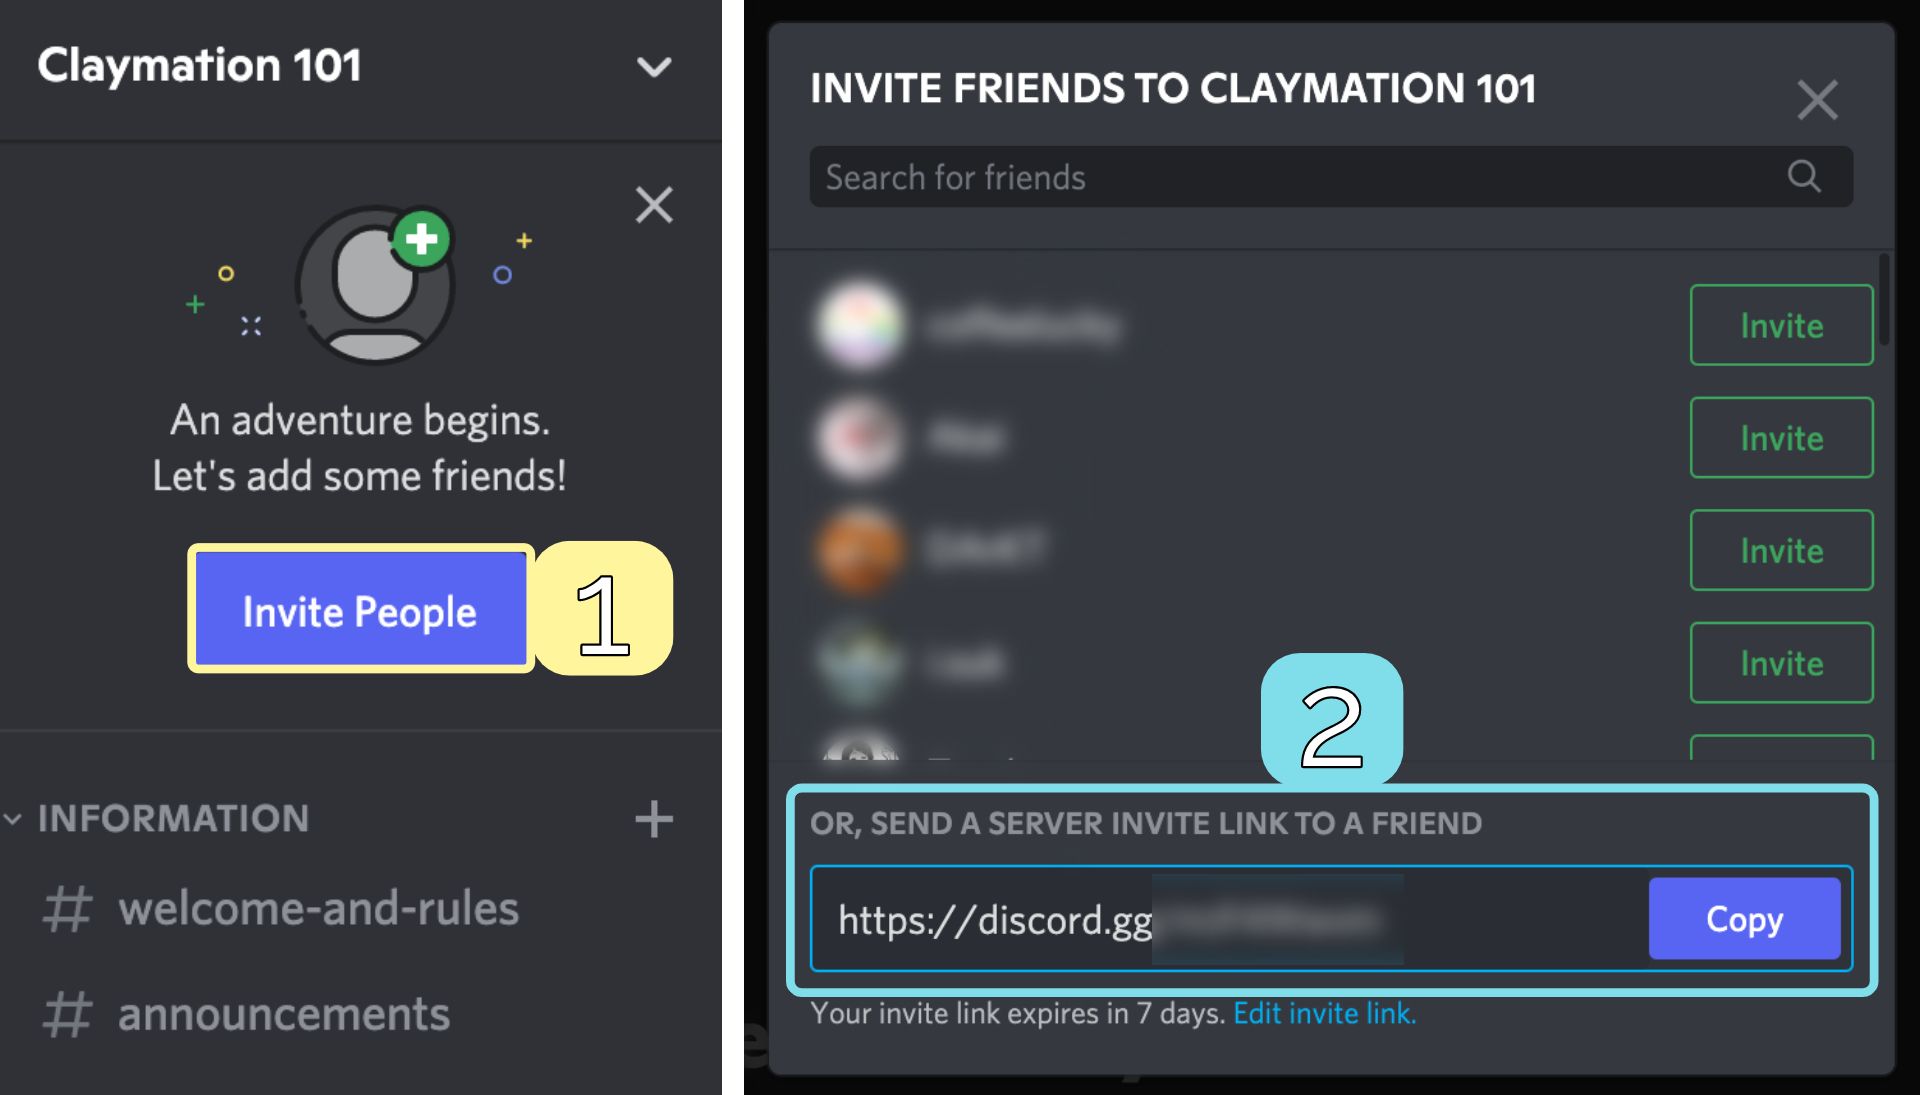 Screenshots showing how to send invites from a new Discord server.